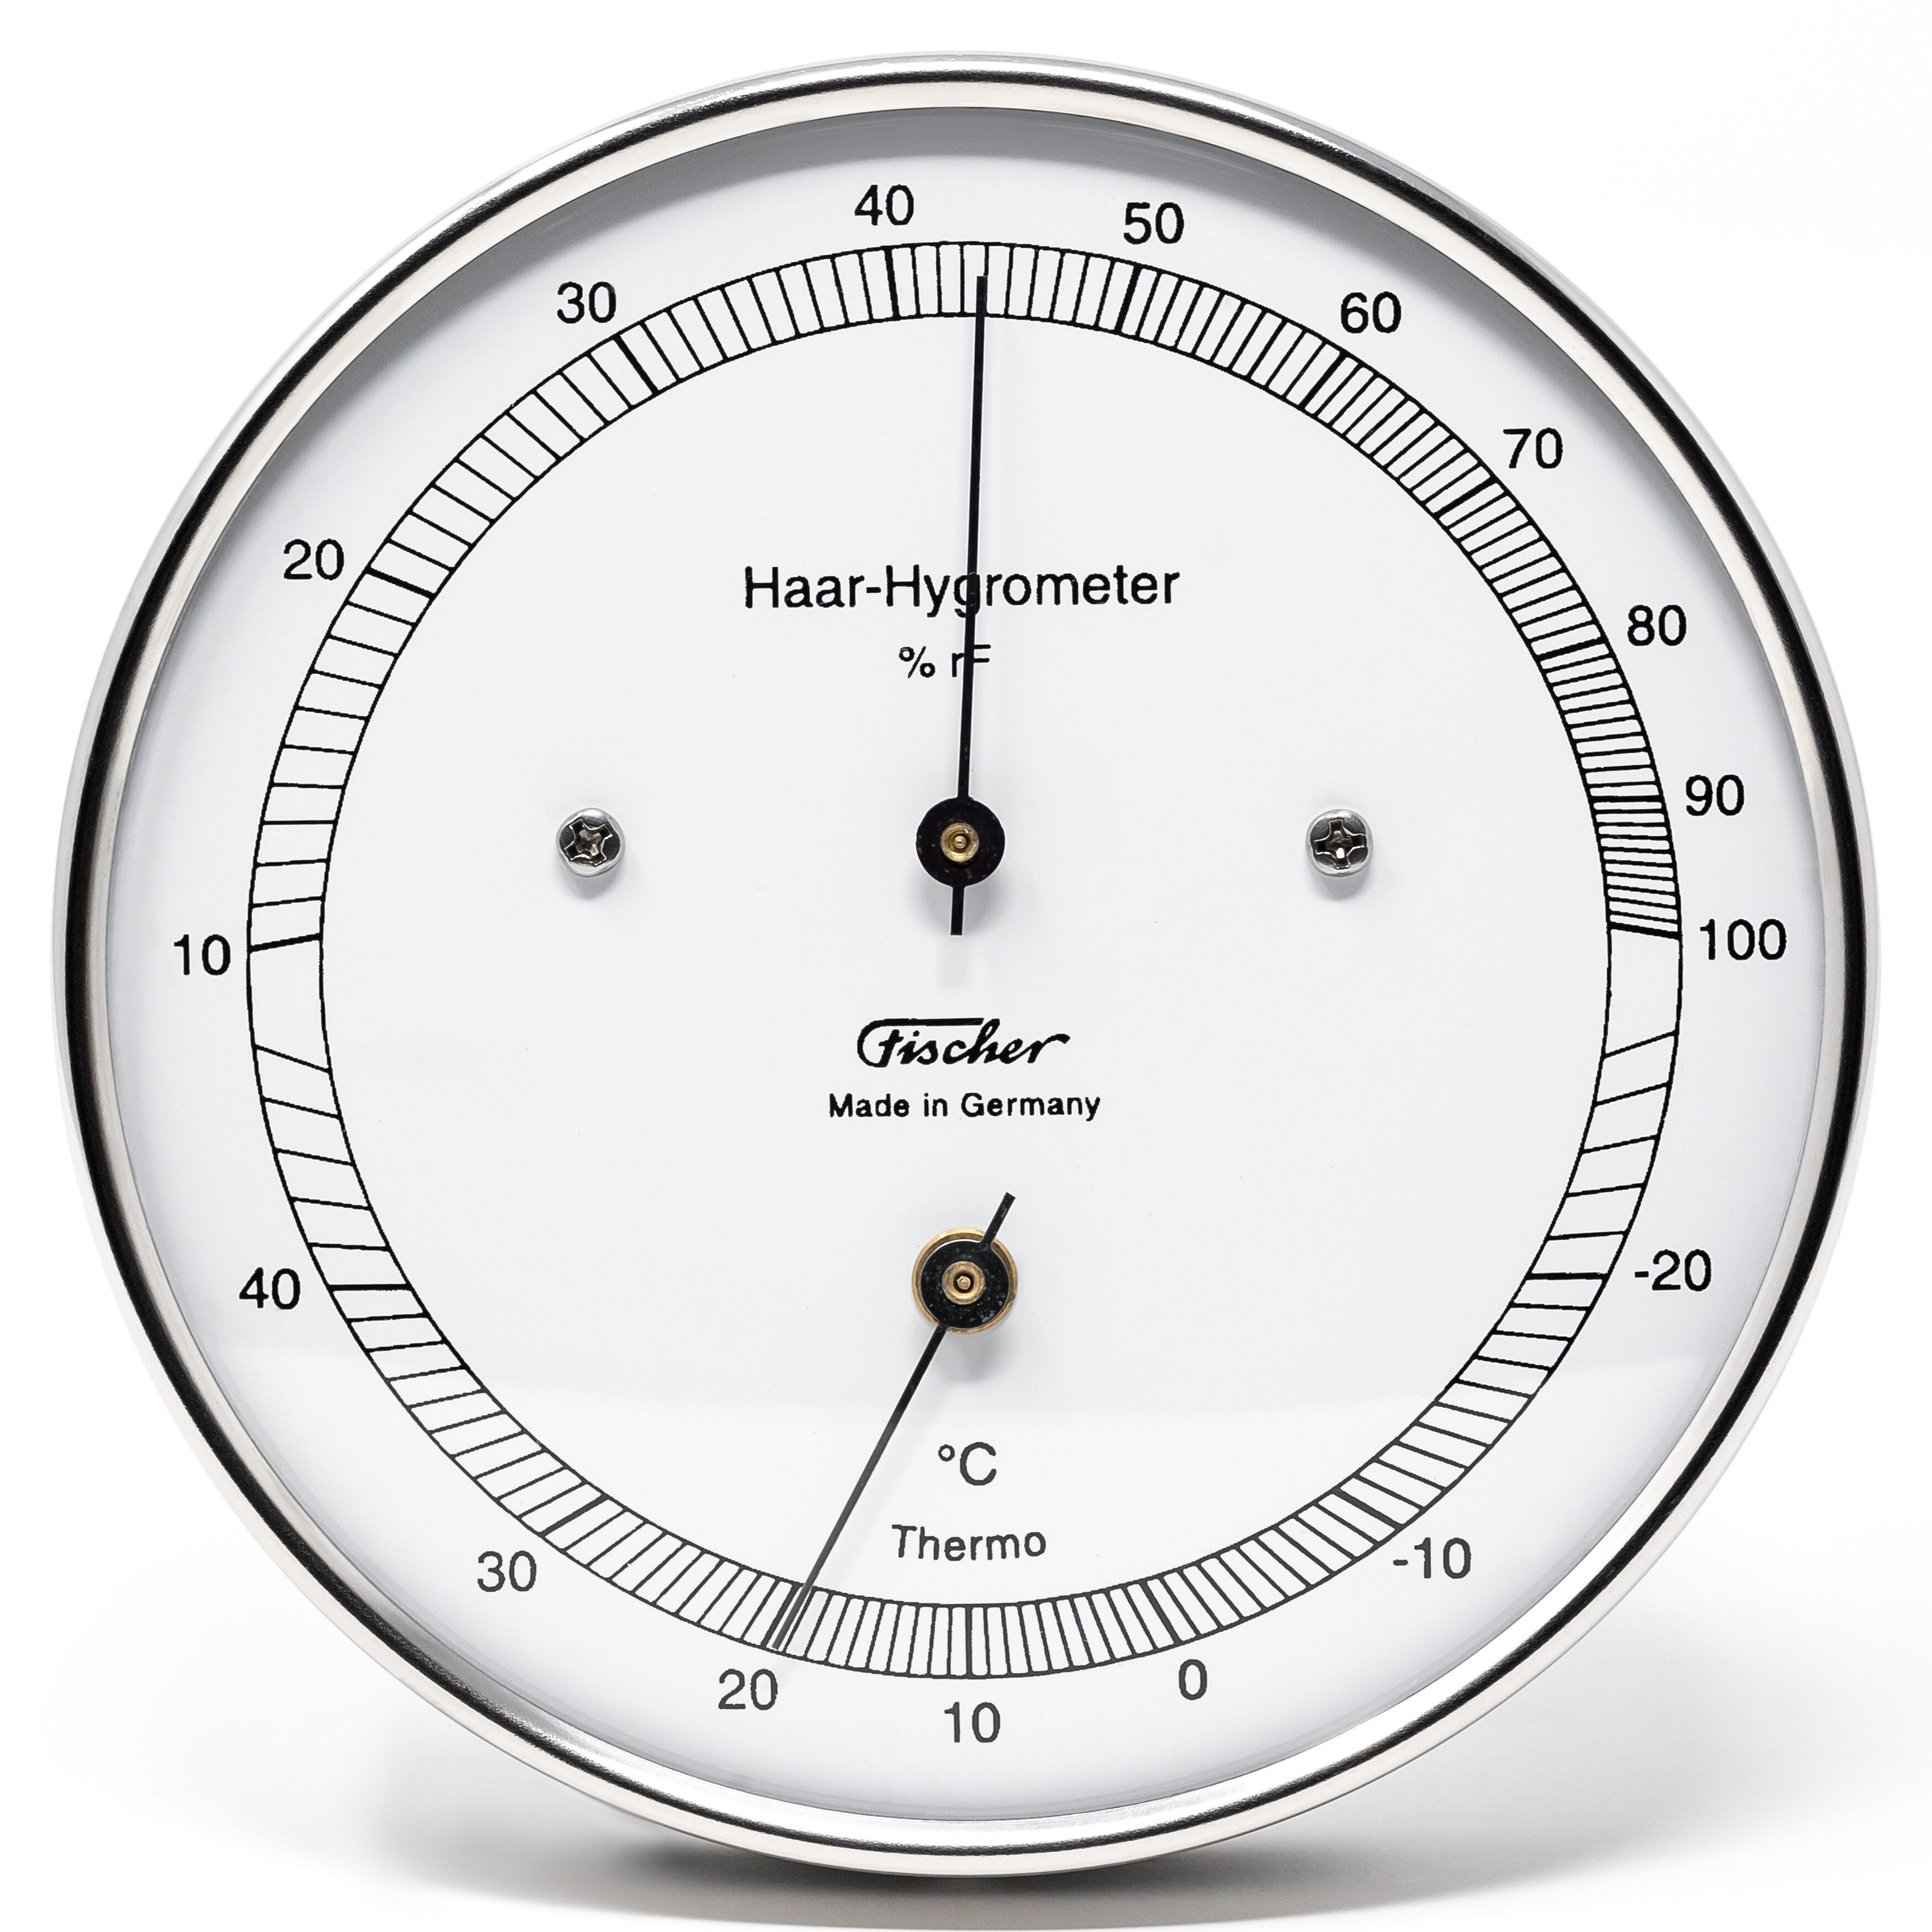 Hair Hygrometer with Thermometer - Vin et Passion web